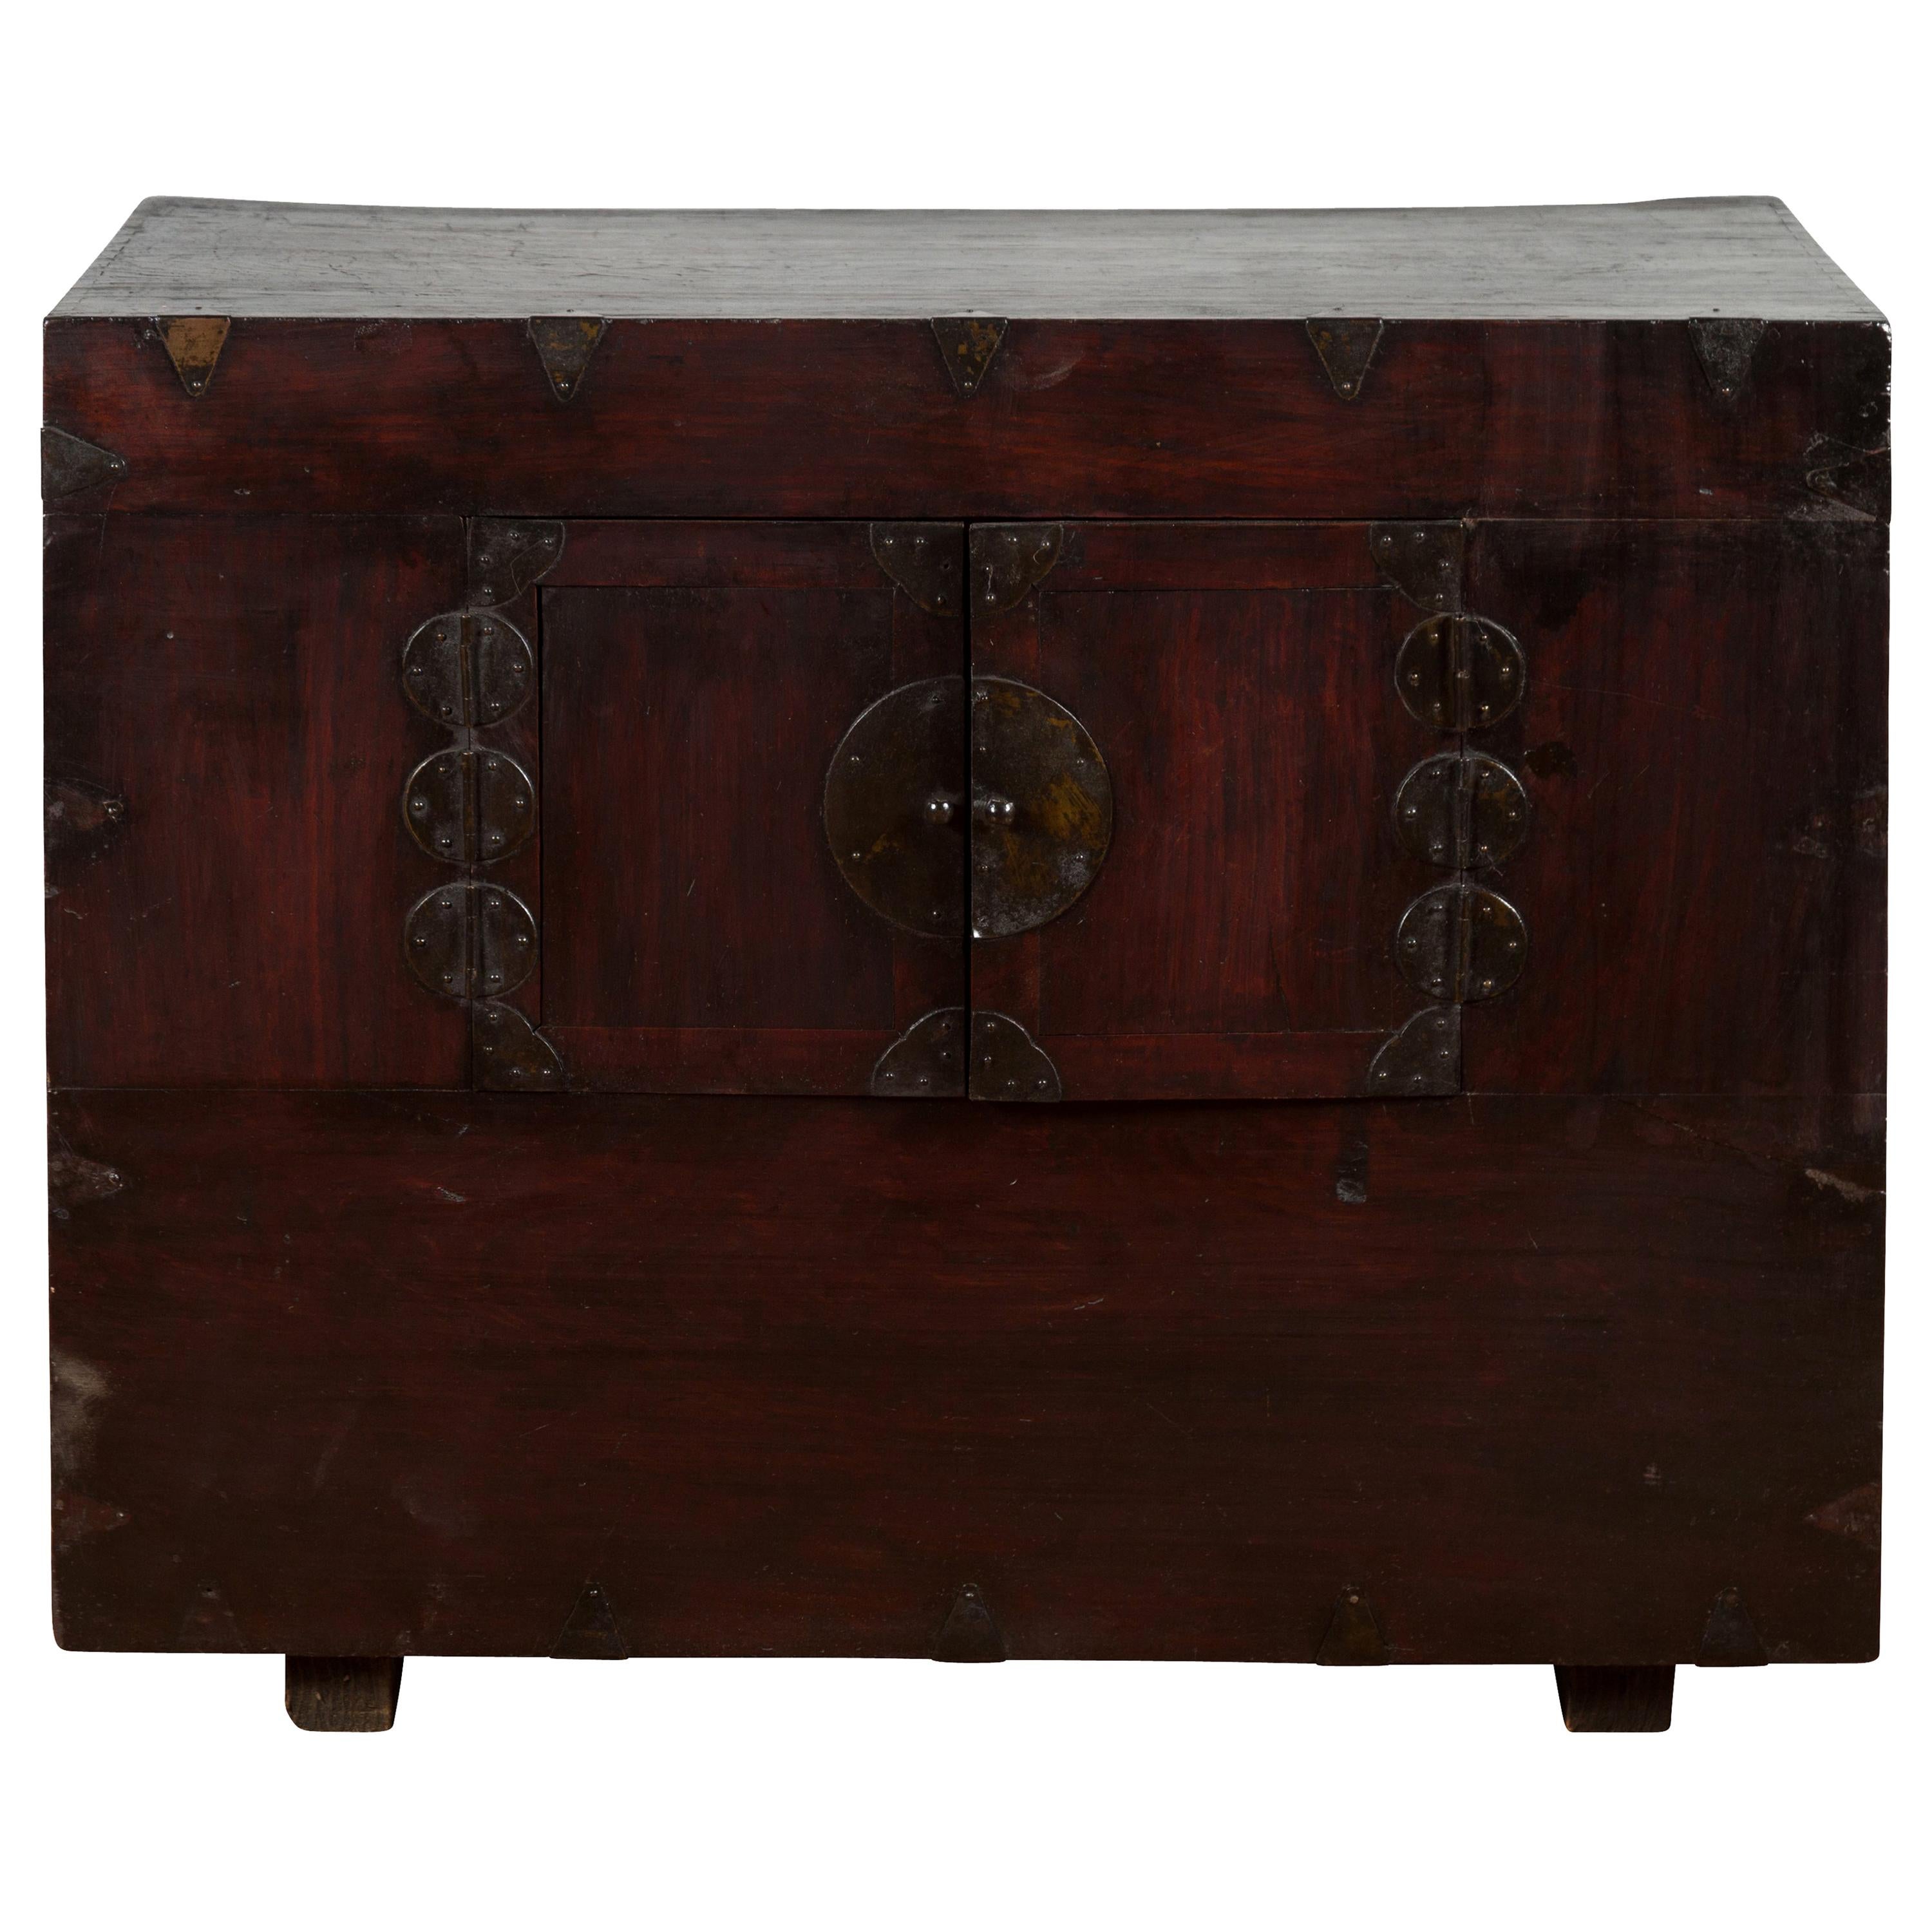 19th Century Brown Lacquered Wood Korean Cabinet with Traditional Brass Hardware